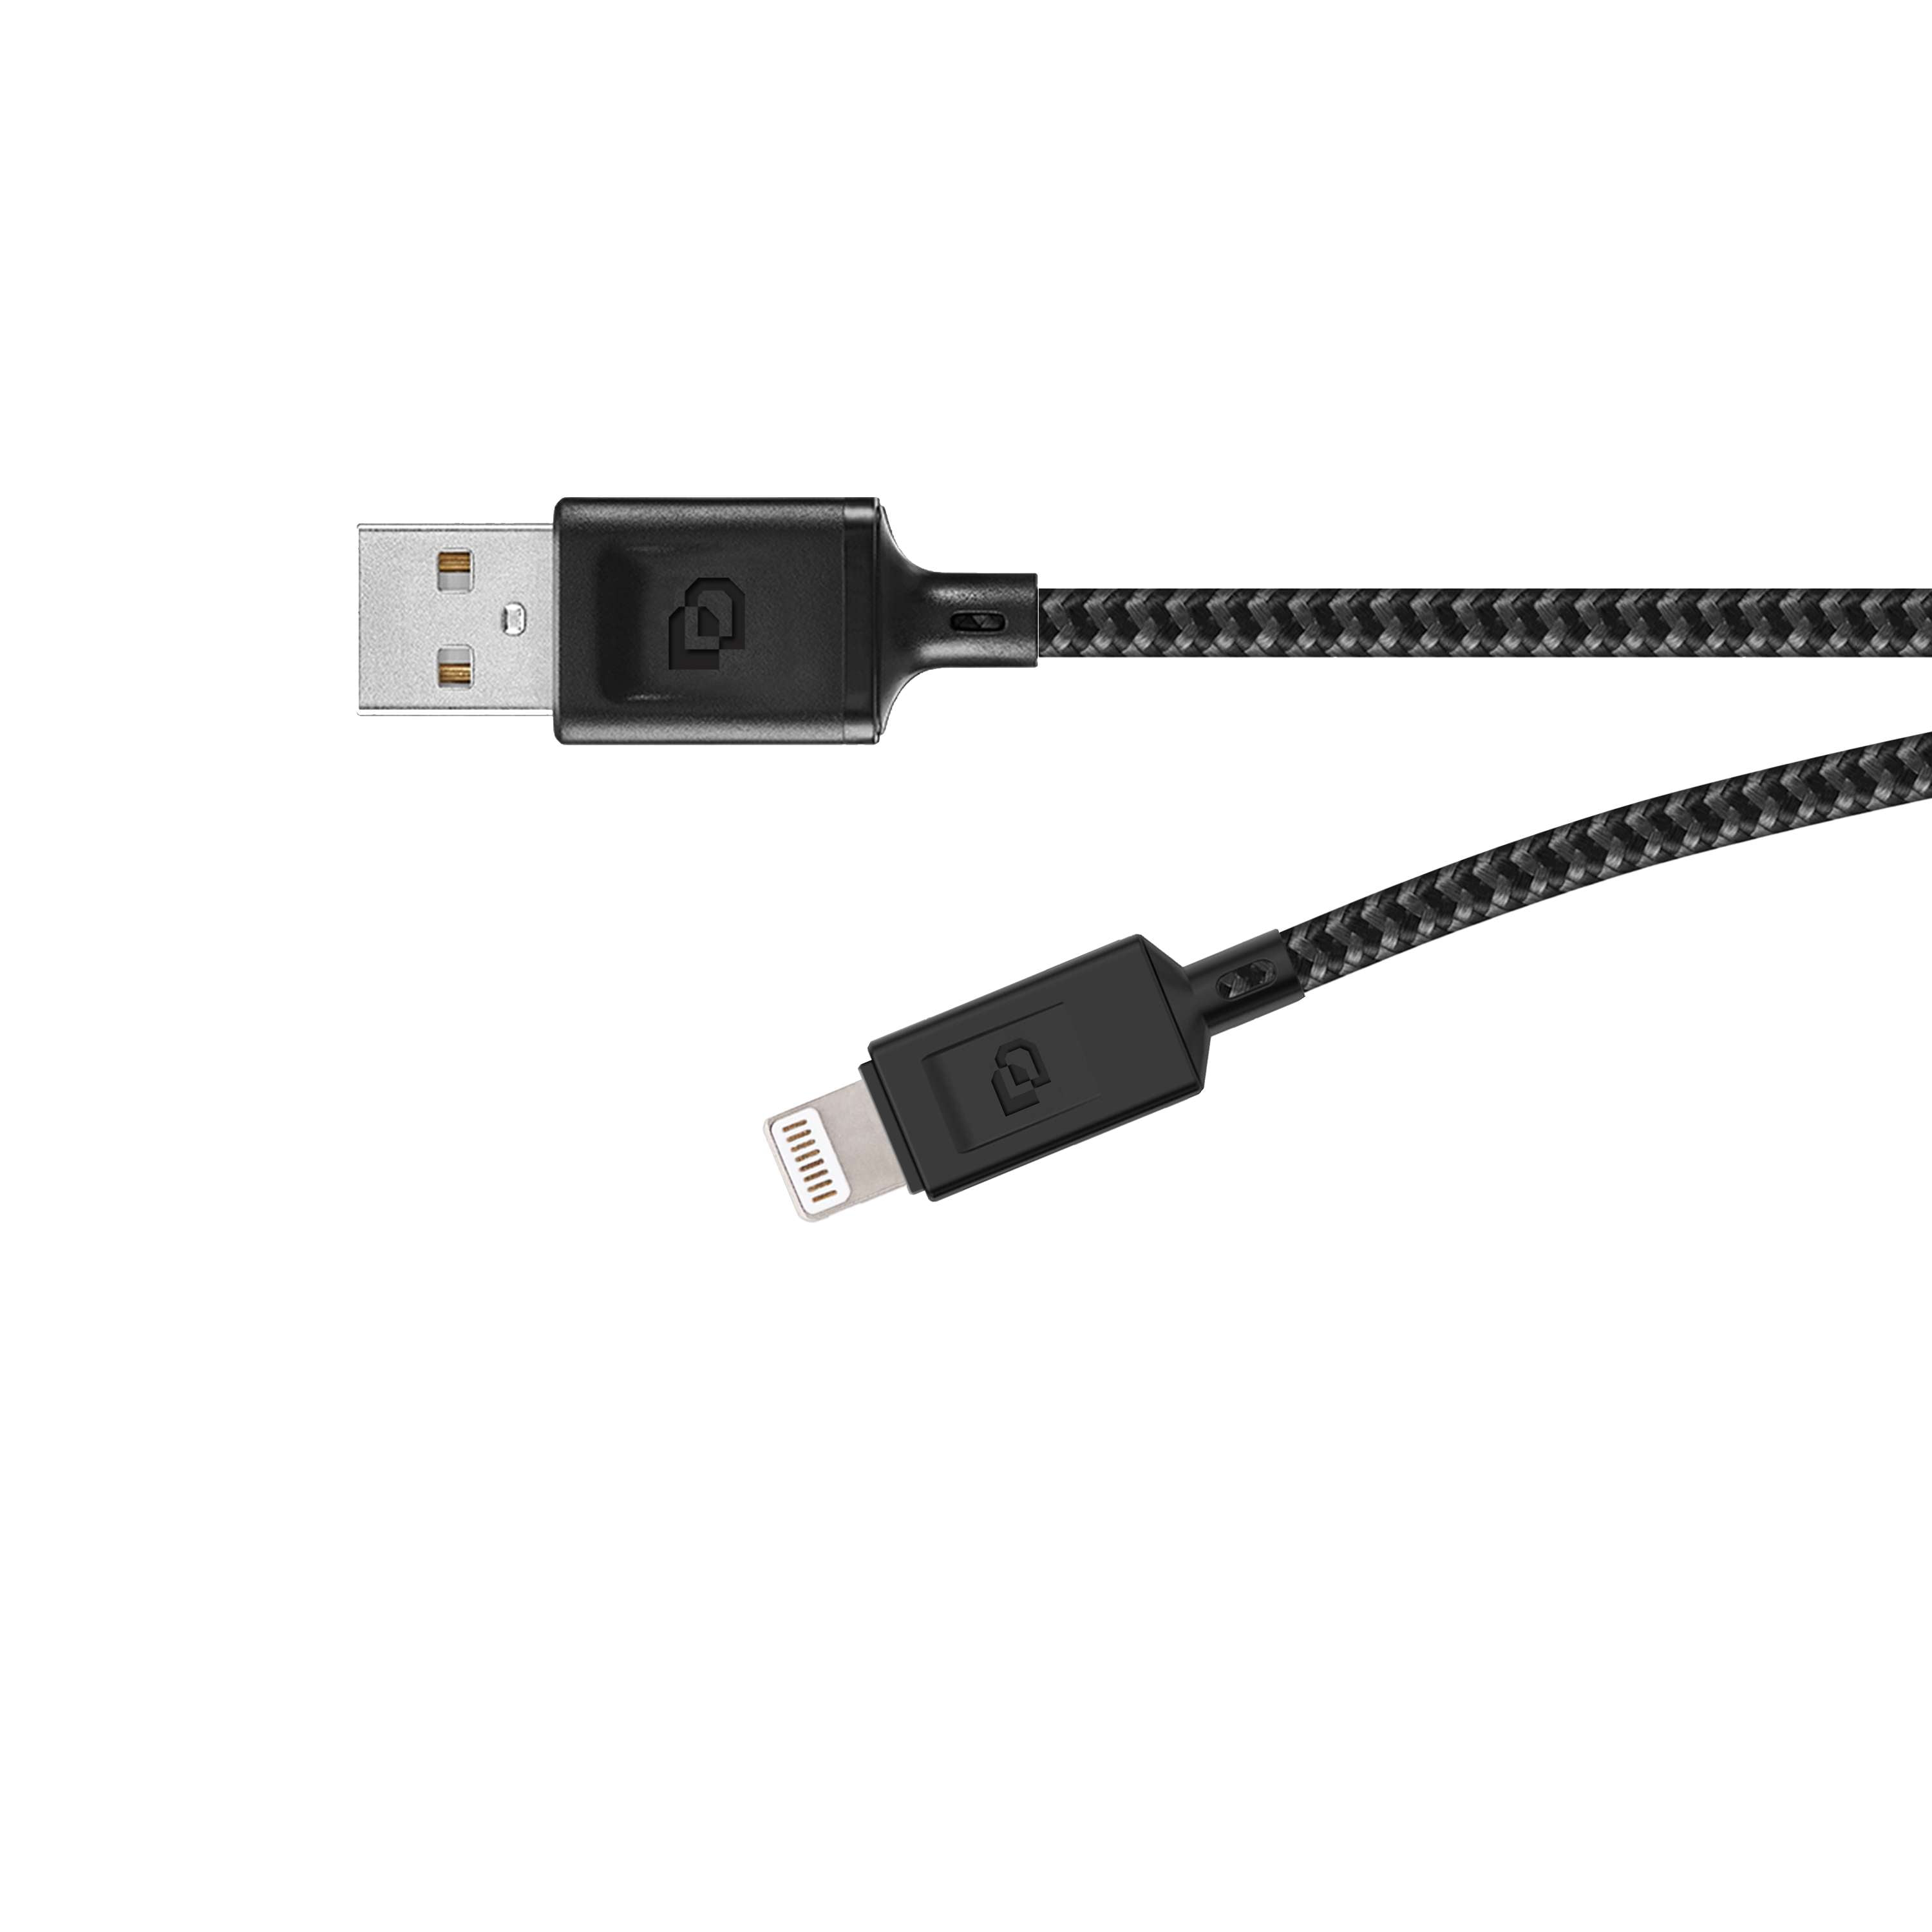 Cable Lightning MFi a USB-A 1.2 Mt Rugged Dusted negro